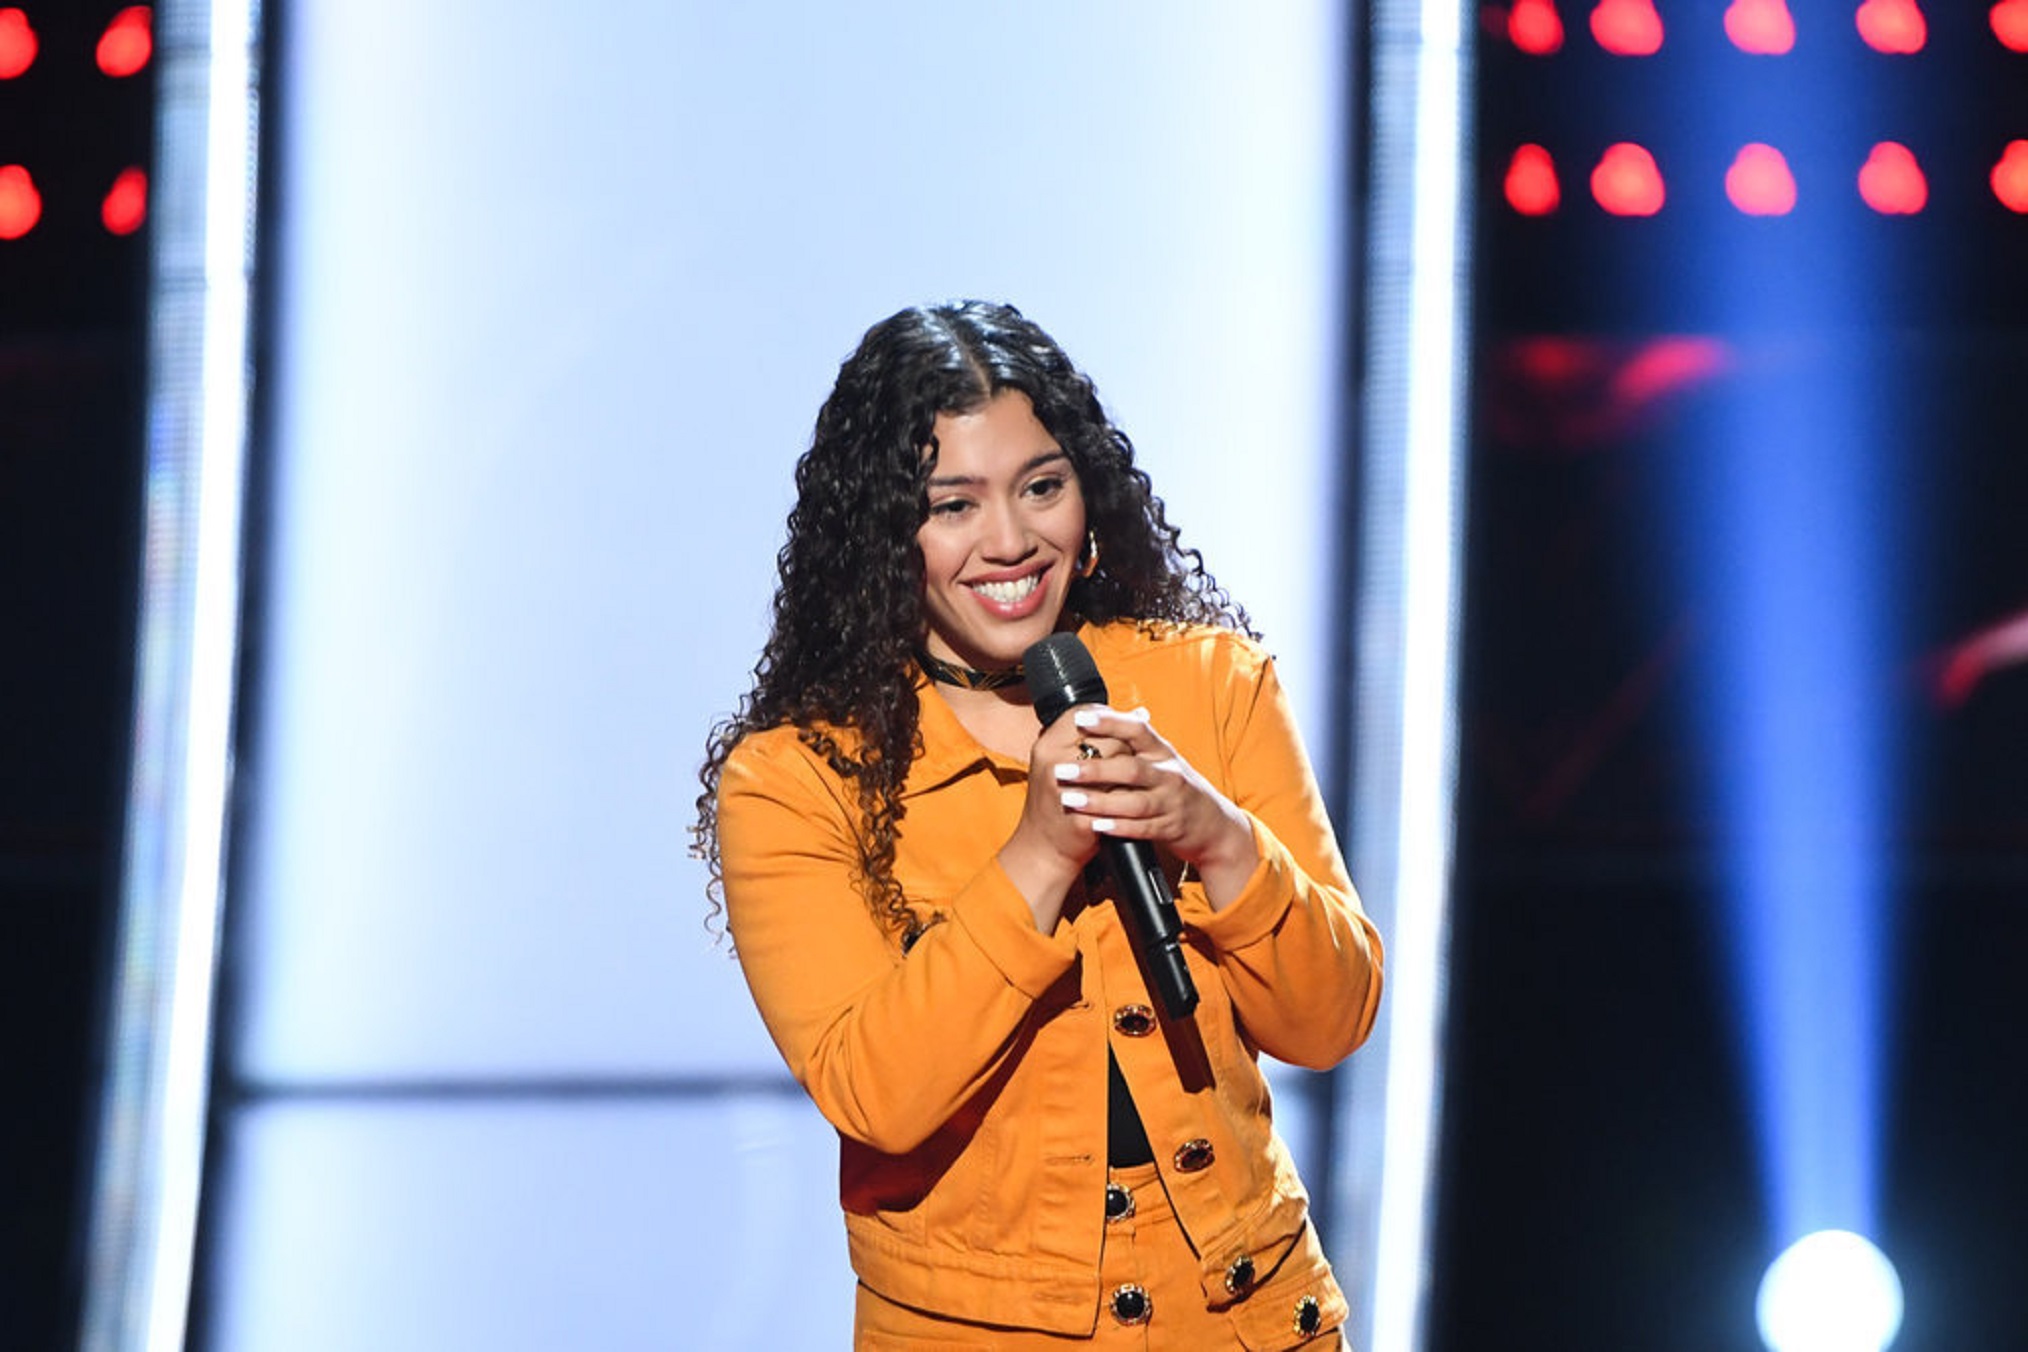 The Voice': 9 Must-See Performances From the Blind Auditions, Part 5 (VIDEO)